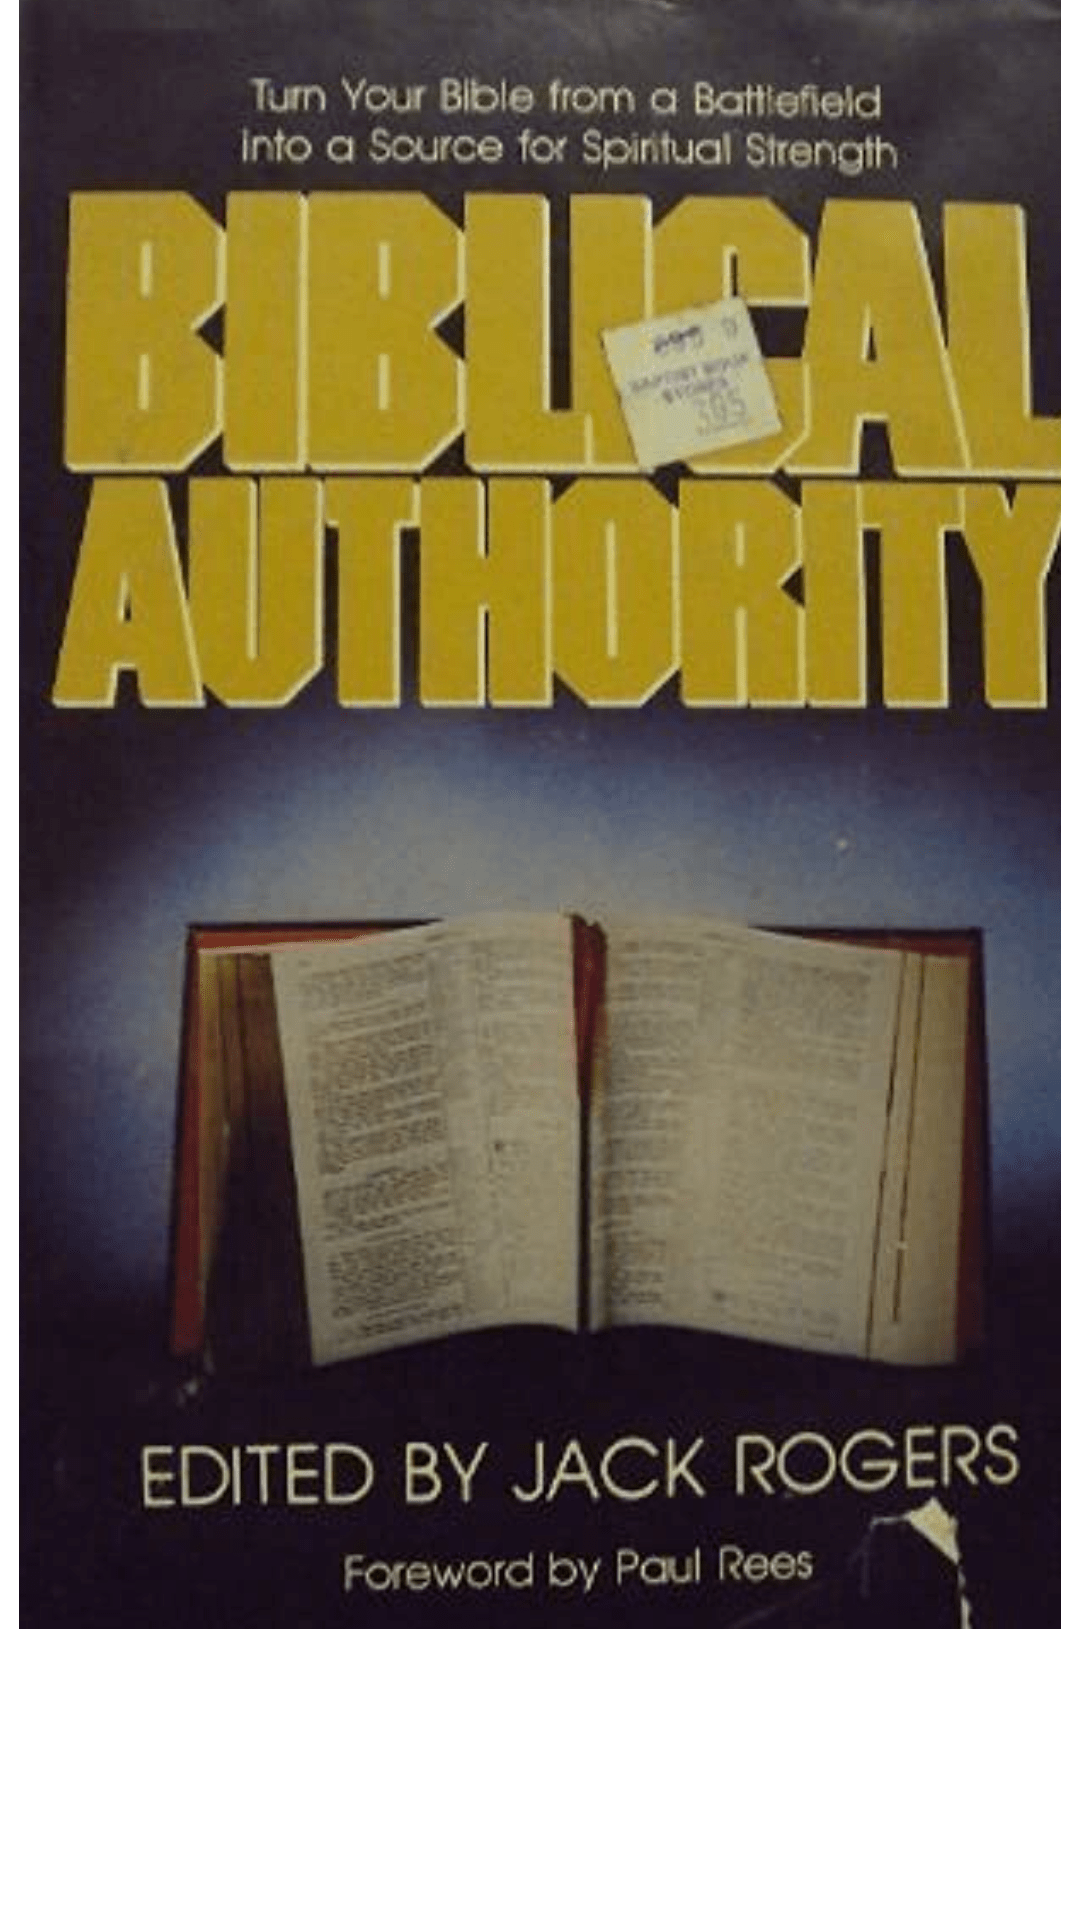 Biblical Authority by Jack Rogers